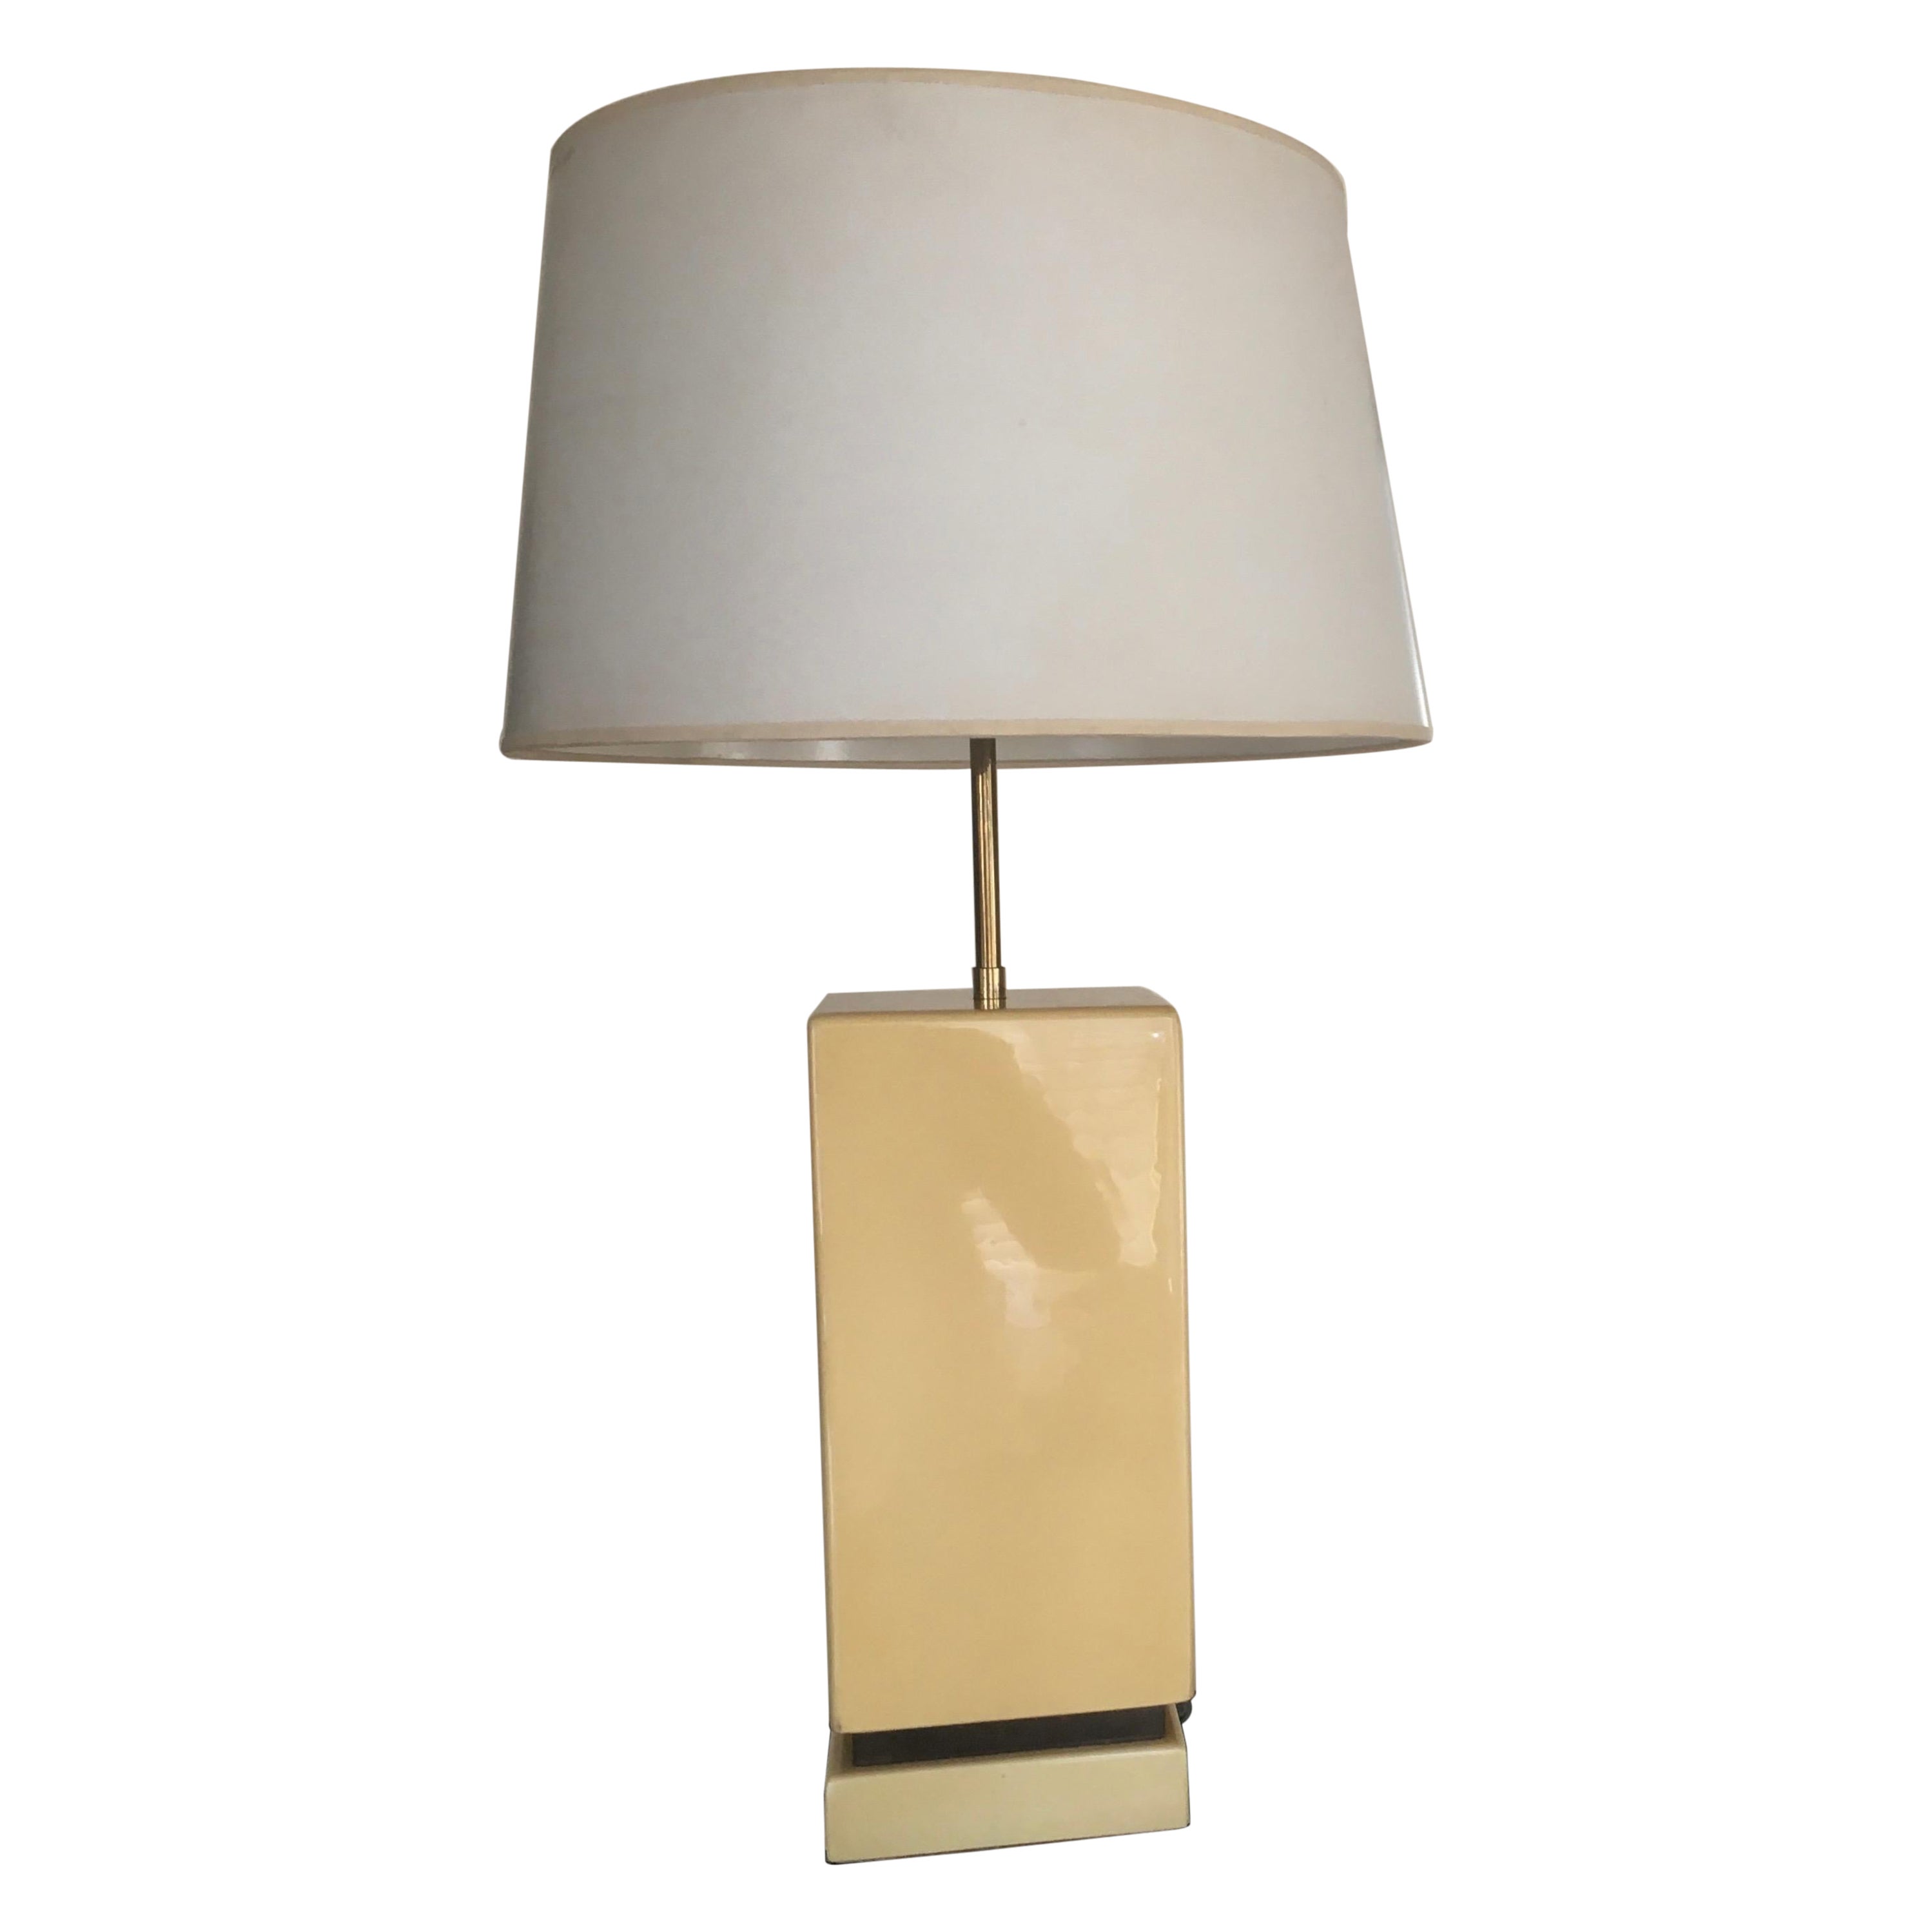 Big Table Lamp Covered with Parchment and Brass Details by Aldo Tura, Italy 1975 For Sale